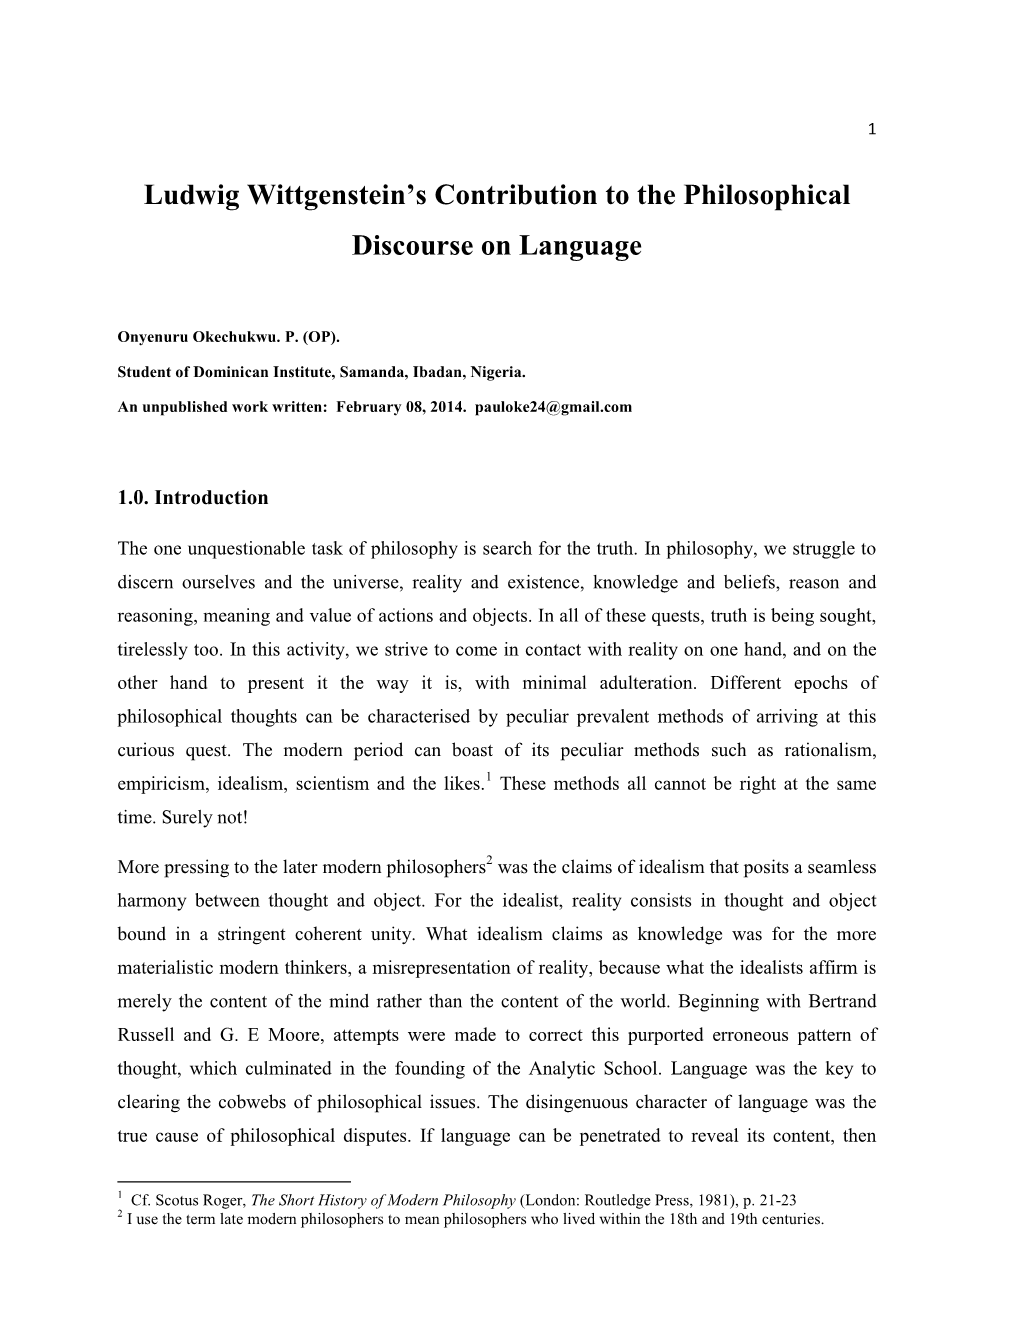 Ludwig Wittgenstein's Contribution to the Philosophical Discourse On